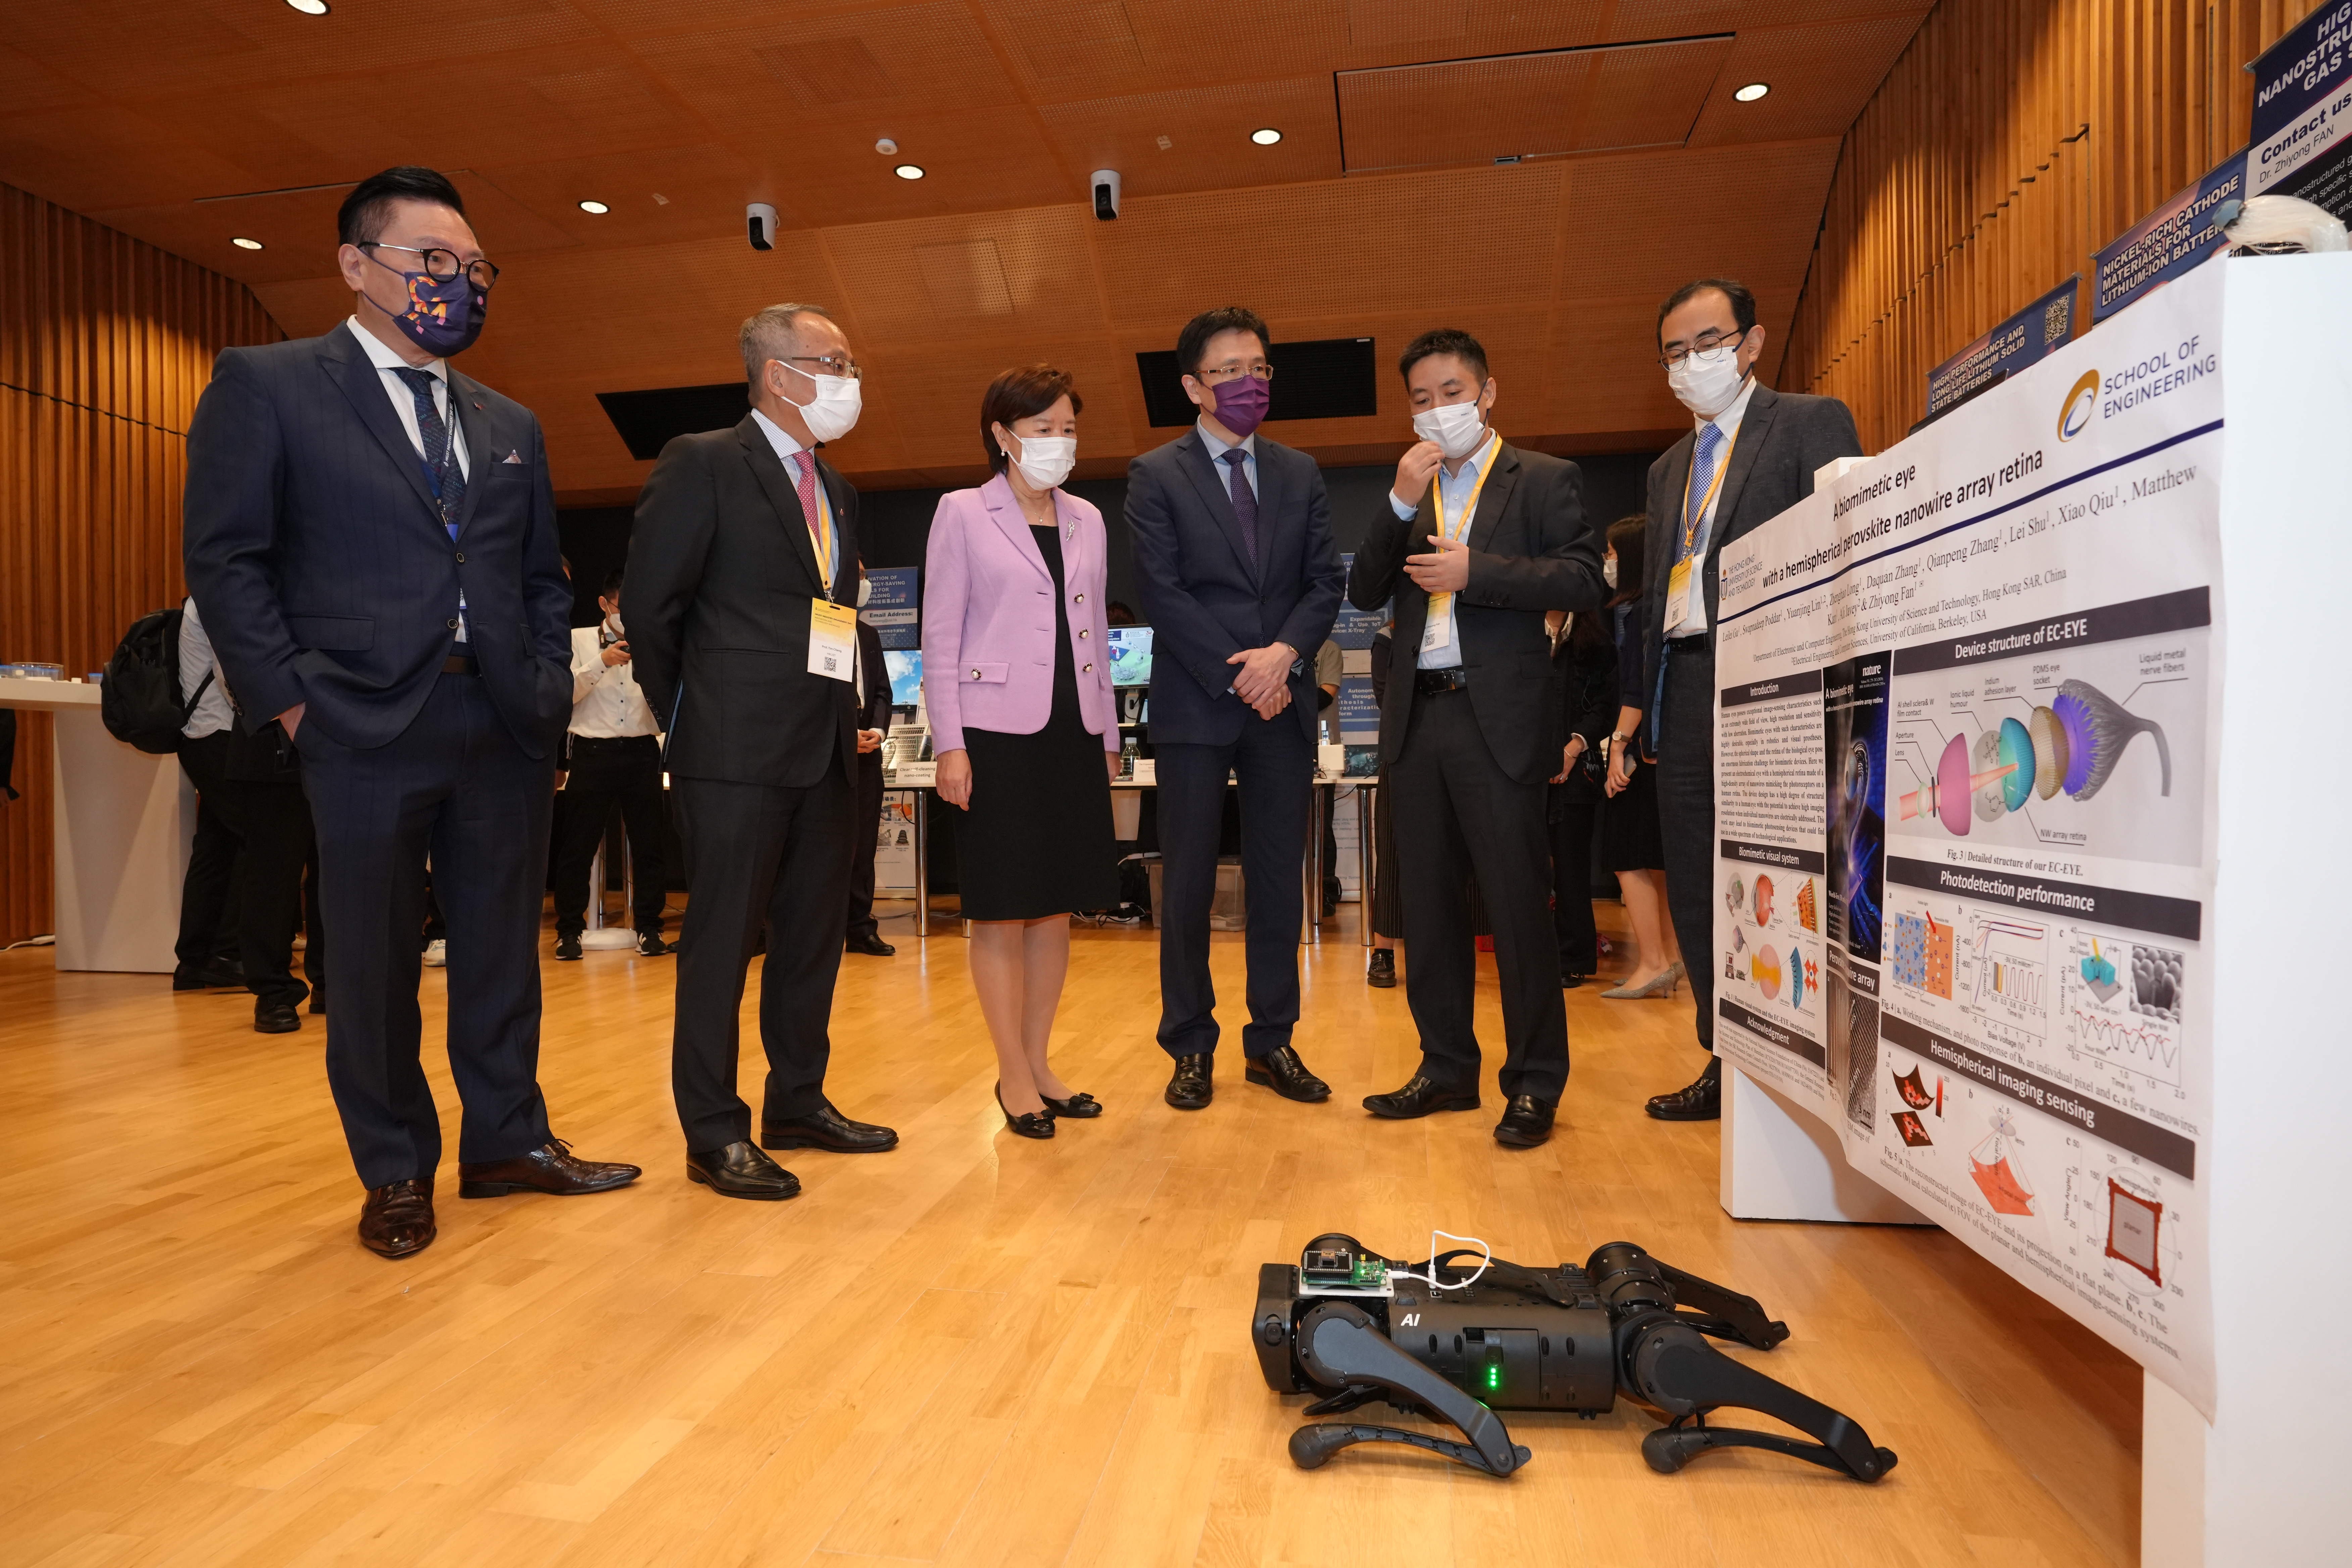 HKUST researchers introduce their research projects to Prof. SUN Dong, Secretary for Innovation, Technology and Industry of the Hong Kong Special Administrative Region (HKSAR) (third right), Prof. Nancy IP, HKUST President (third left), Prof. Tim CHENG, HKUST Vice-President for Research and Development (second left)